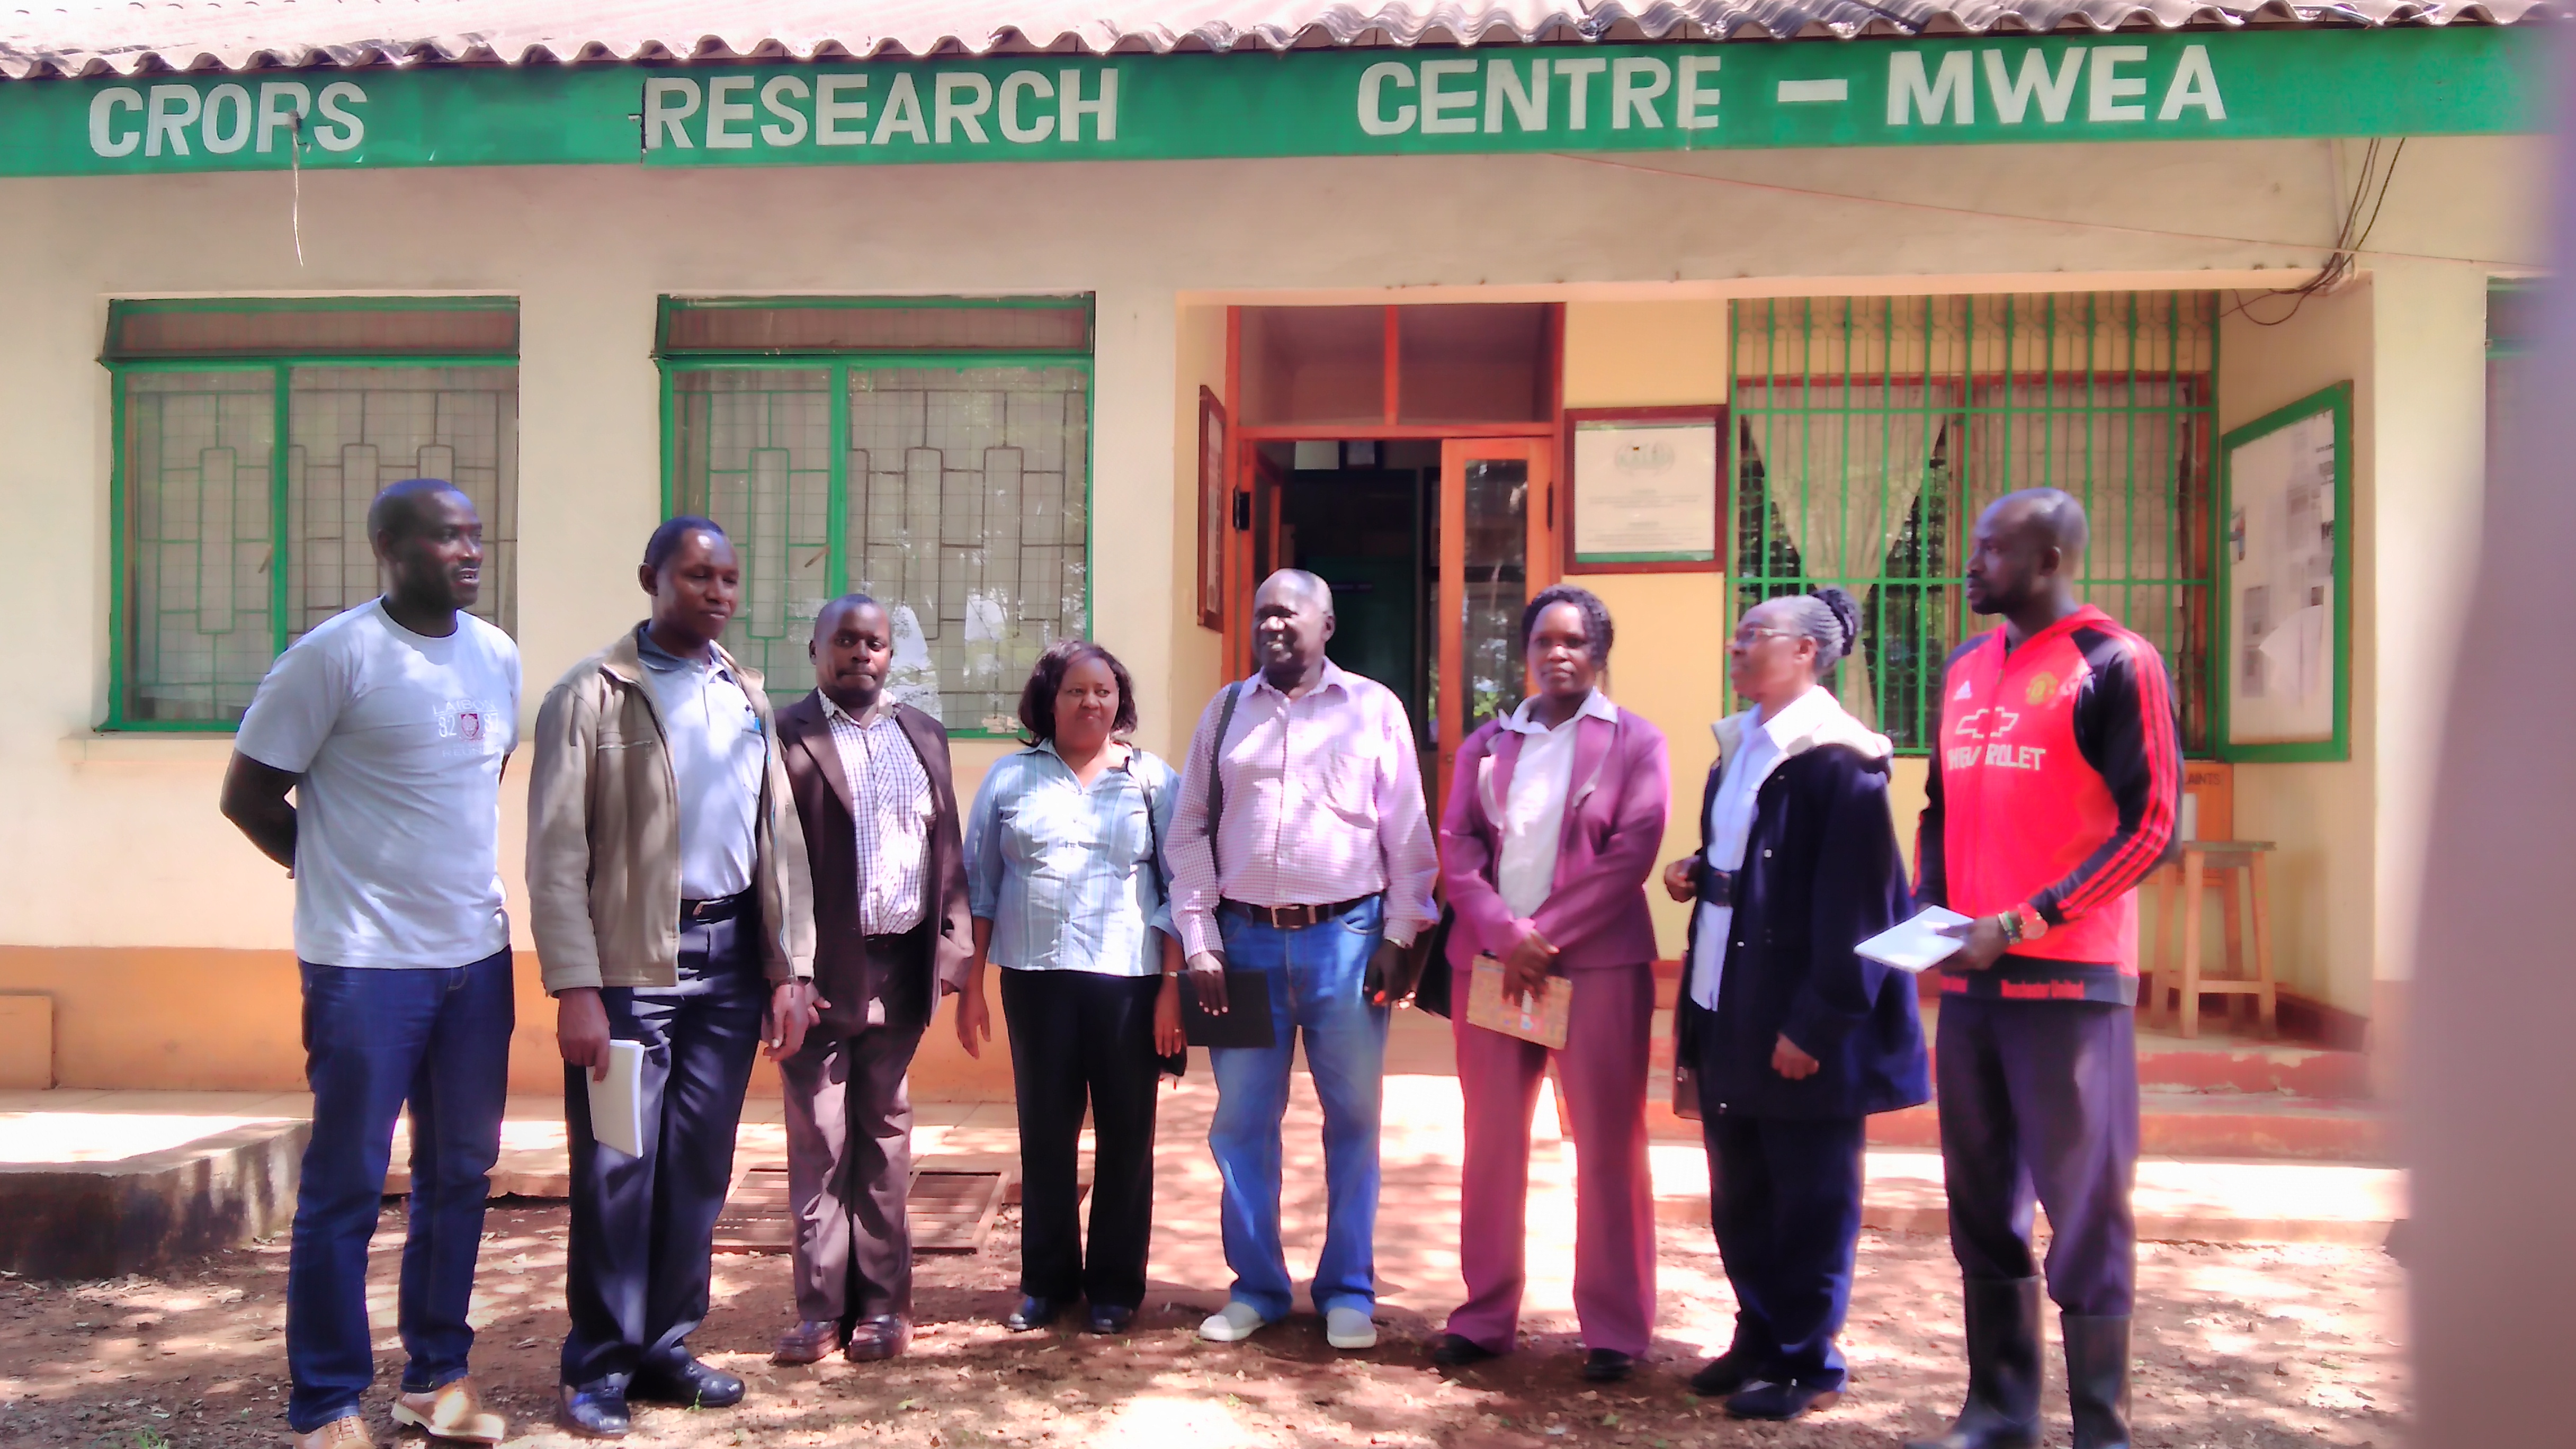 Research Partnership with KALRO in rice research at Mwea Crops Research Centre